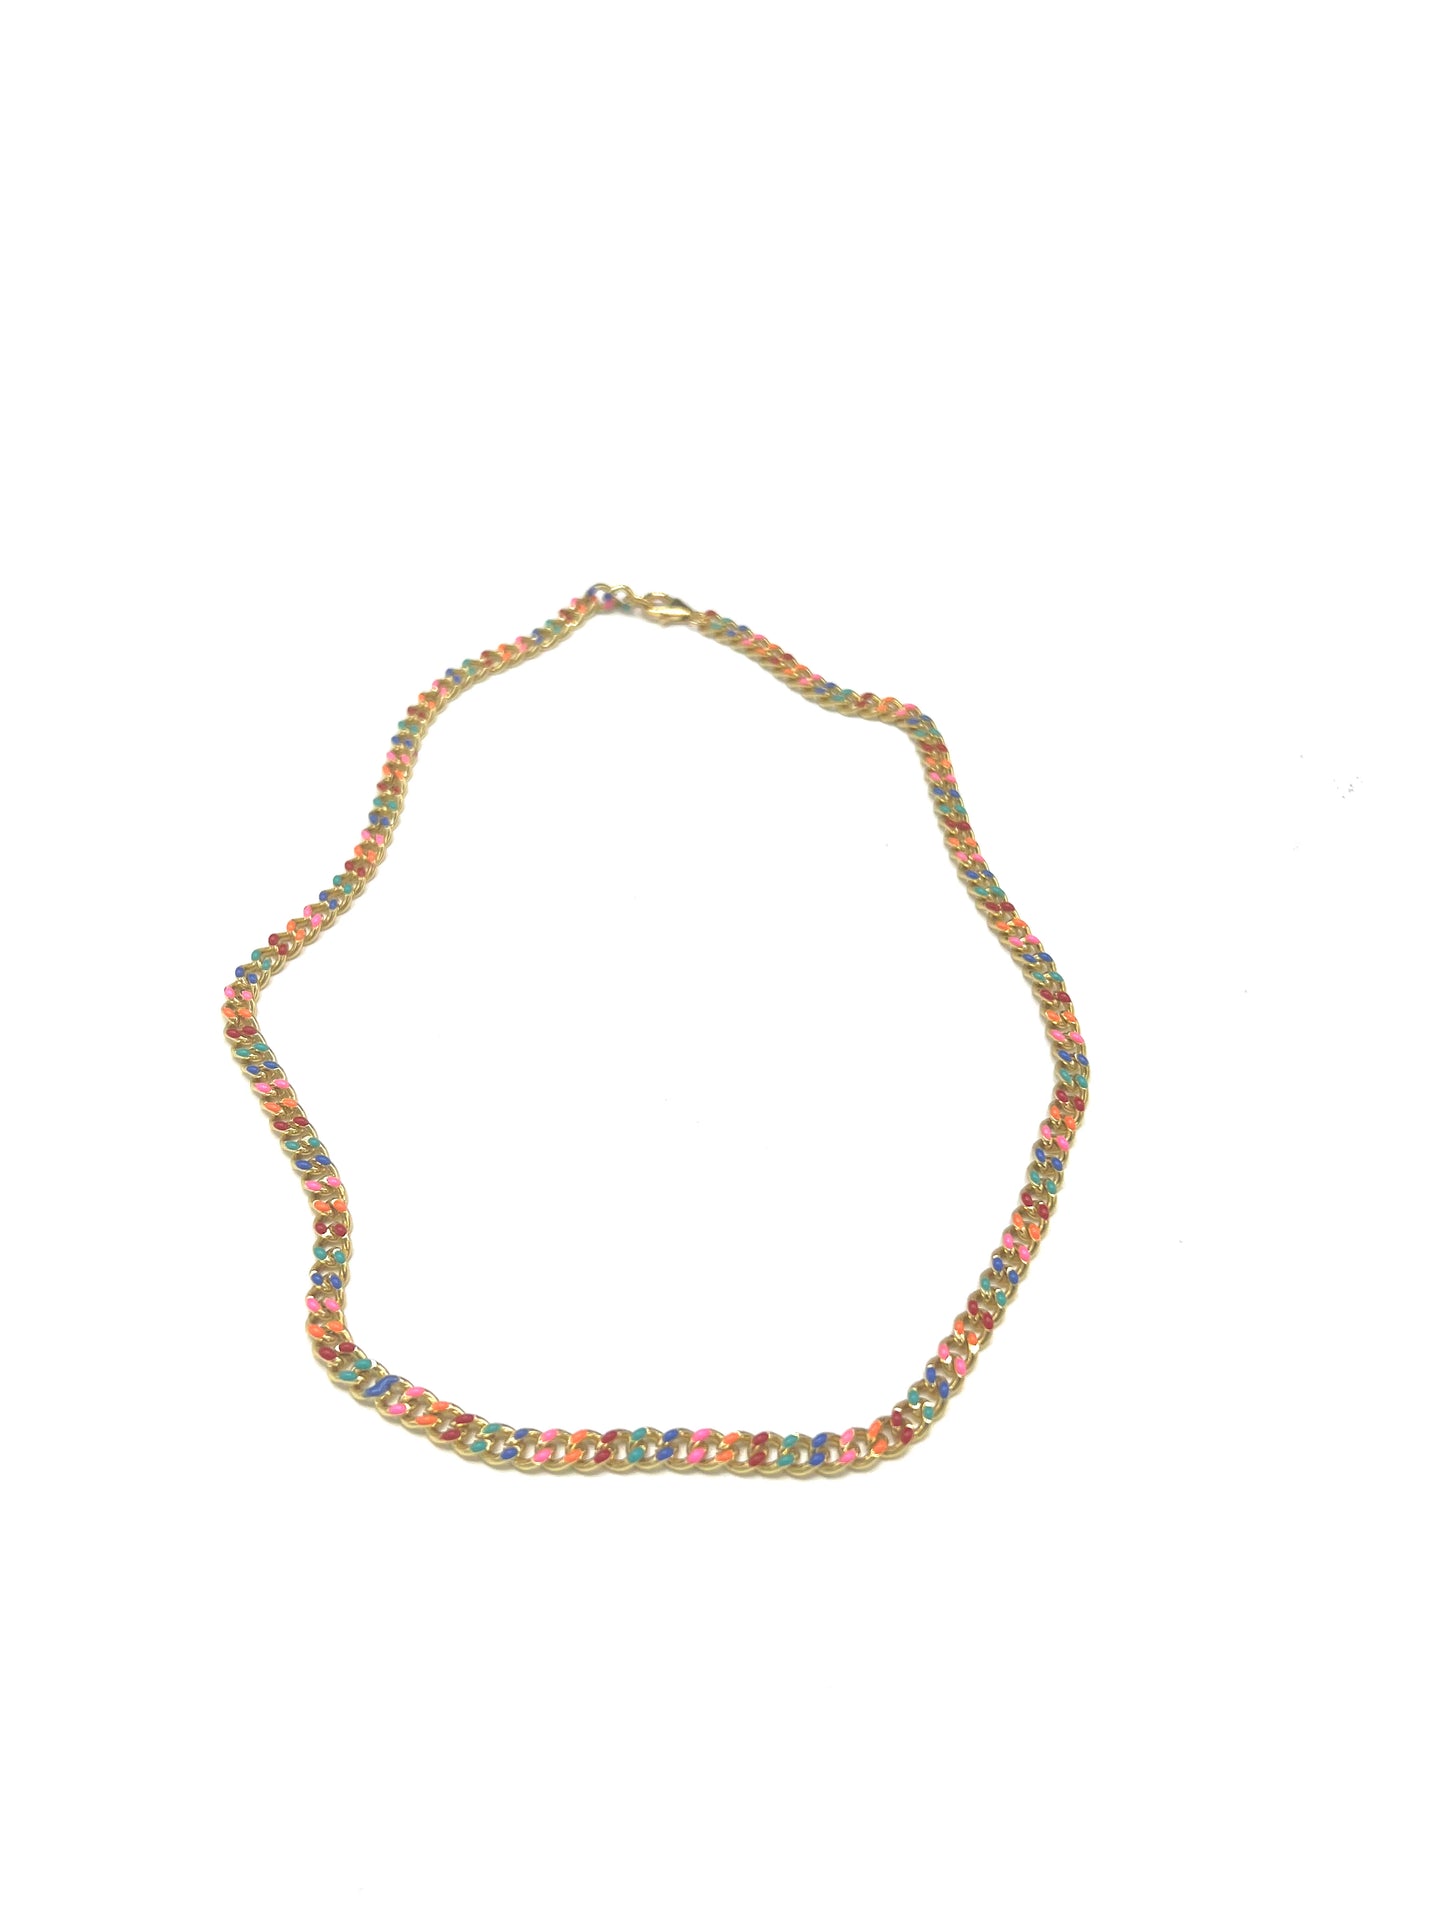 SUMMER CURB NECKLACE